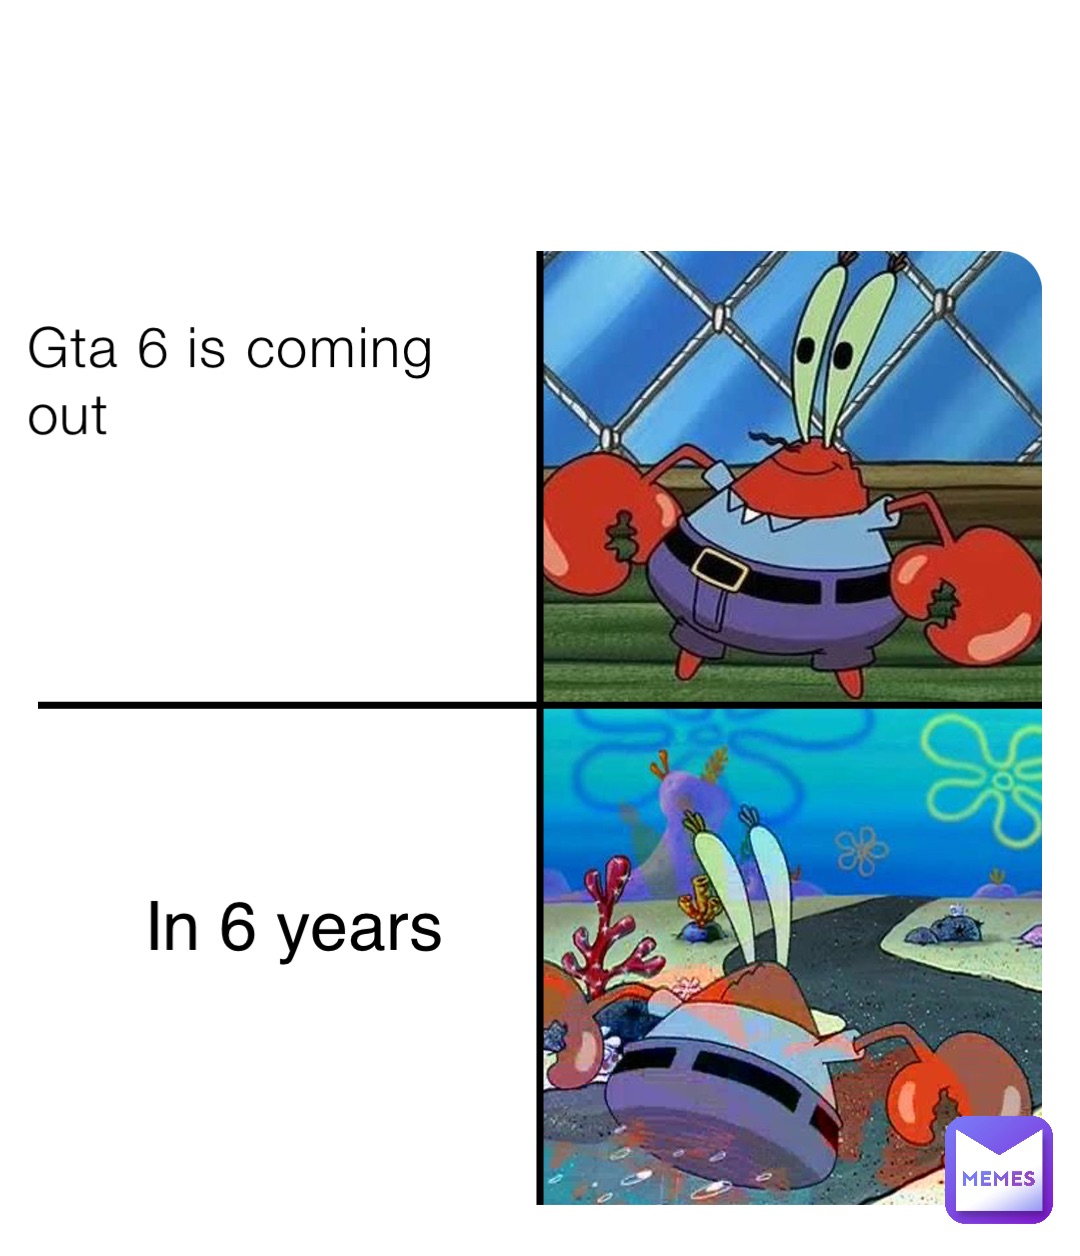 Gta 6 is coming out In 6 years